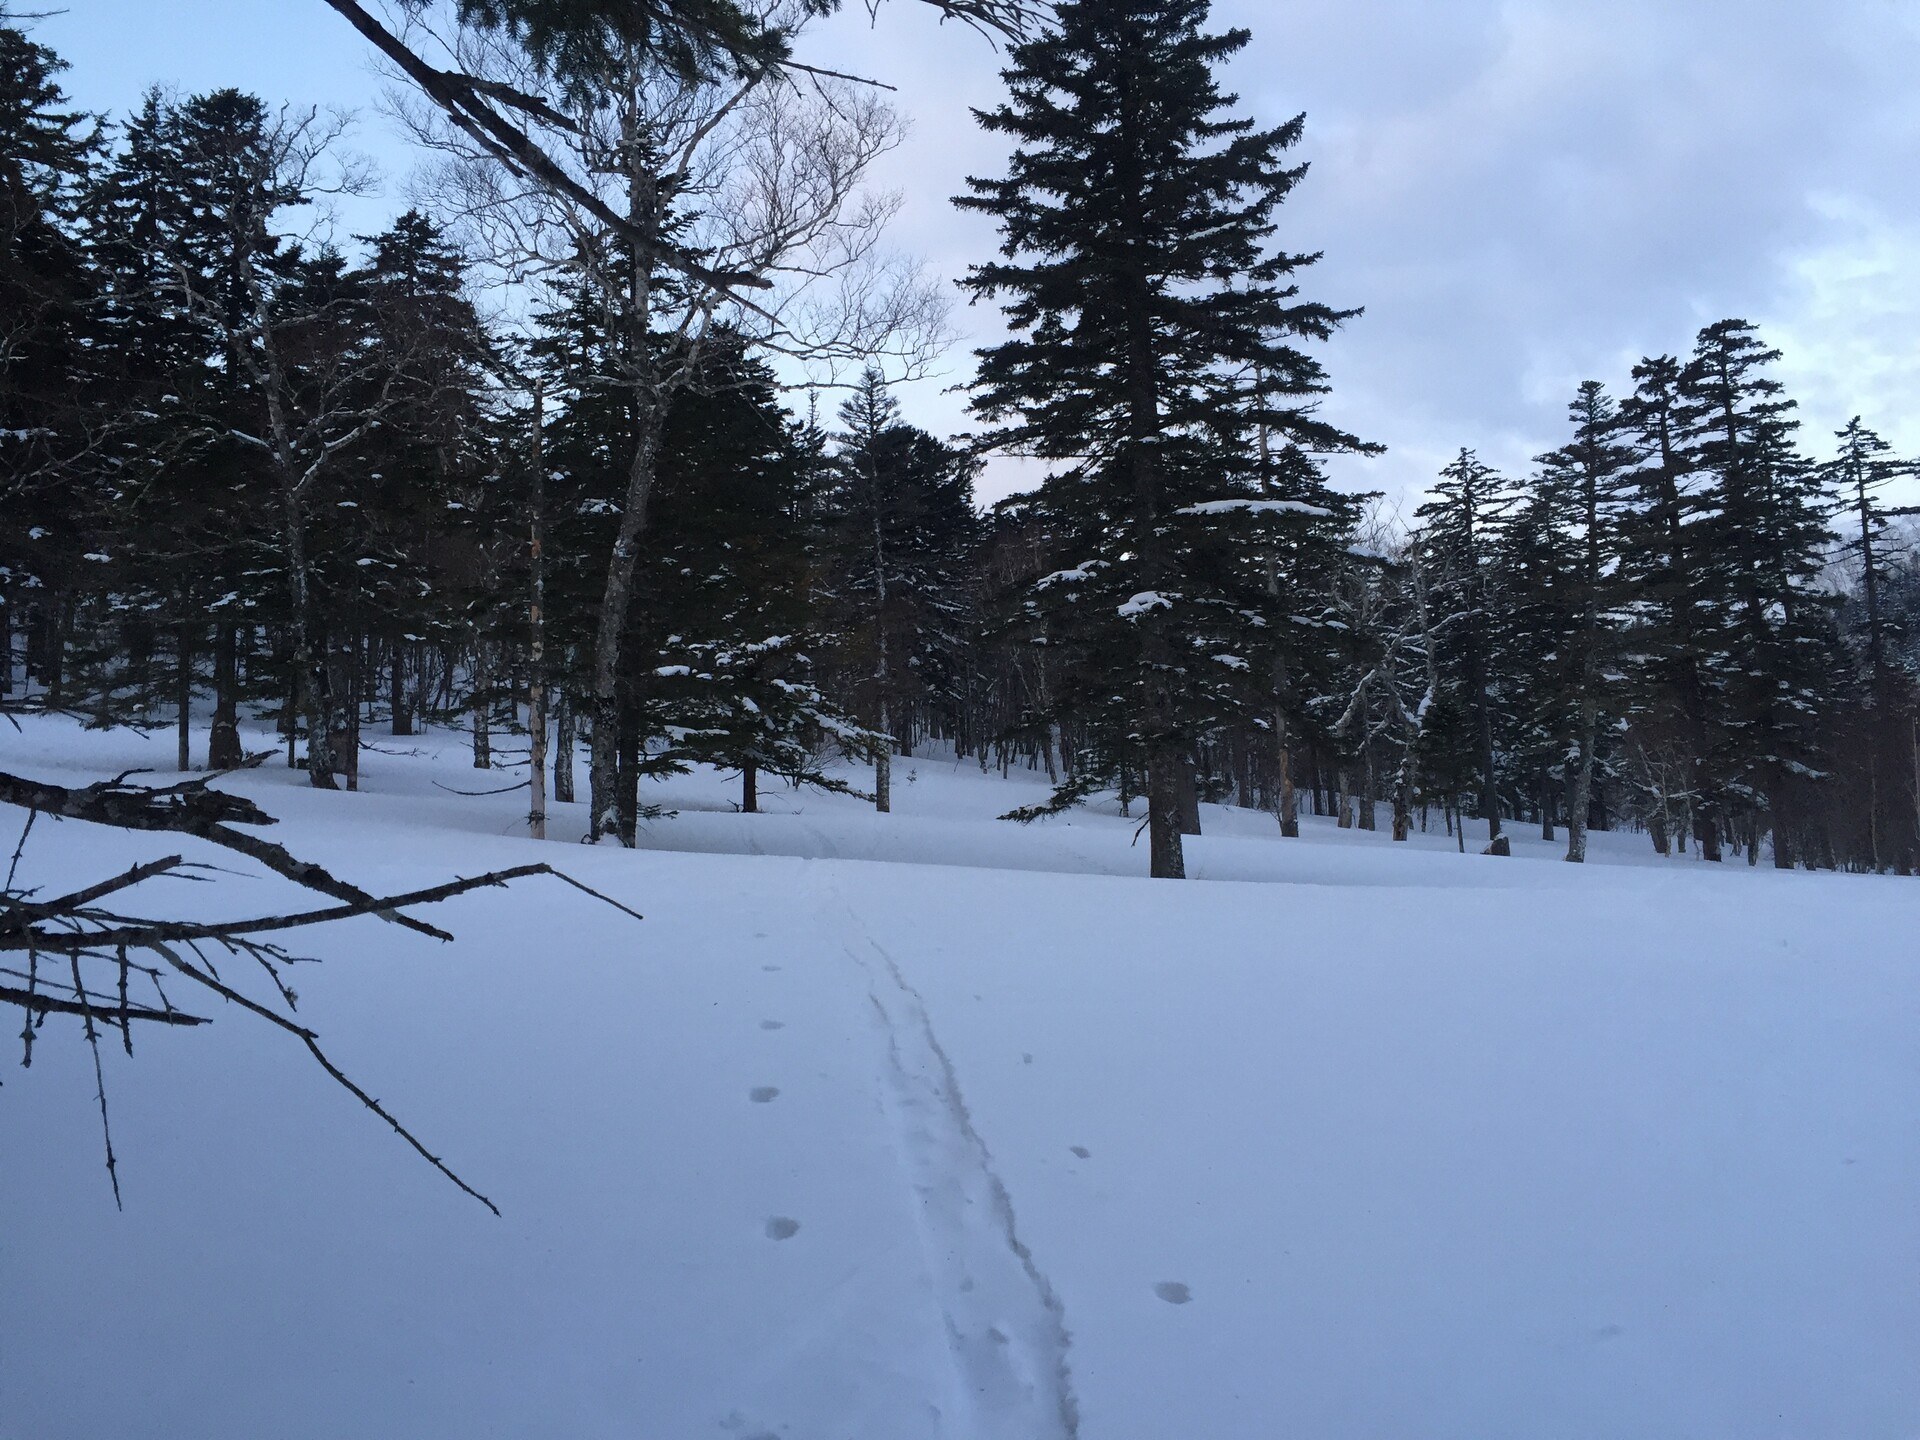 A snowy forest with a set of ski tracks leading off between the trees